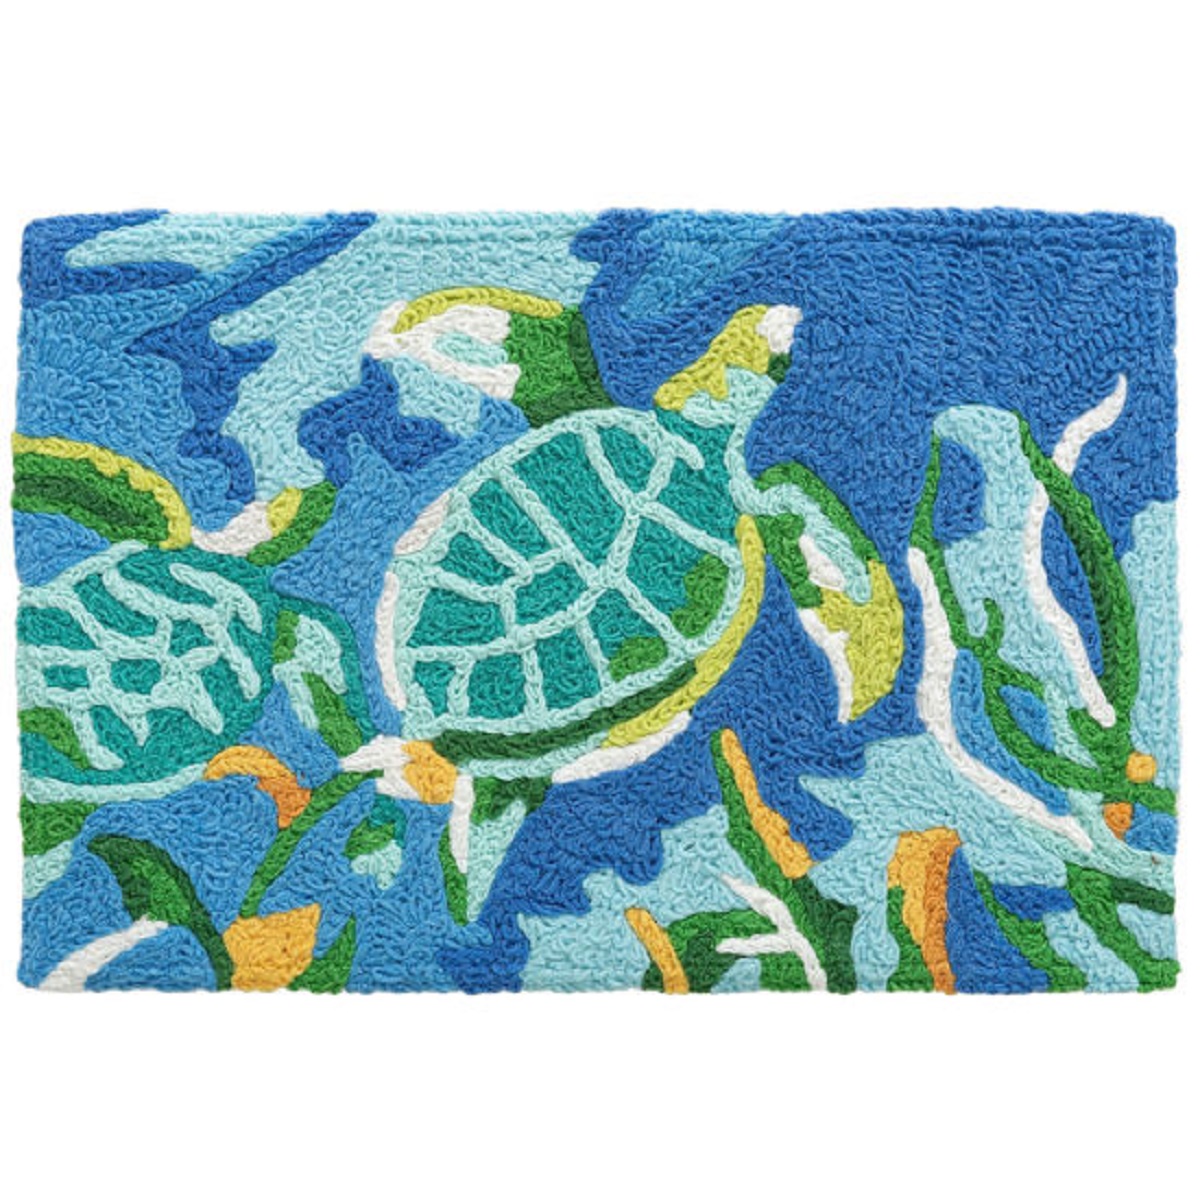 Jellybean Swimming Sea Turtles in Coral 30 X 20 Inch Area Accent Washable Rug